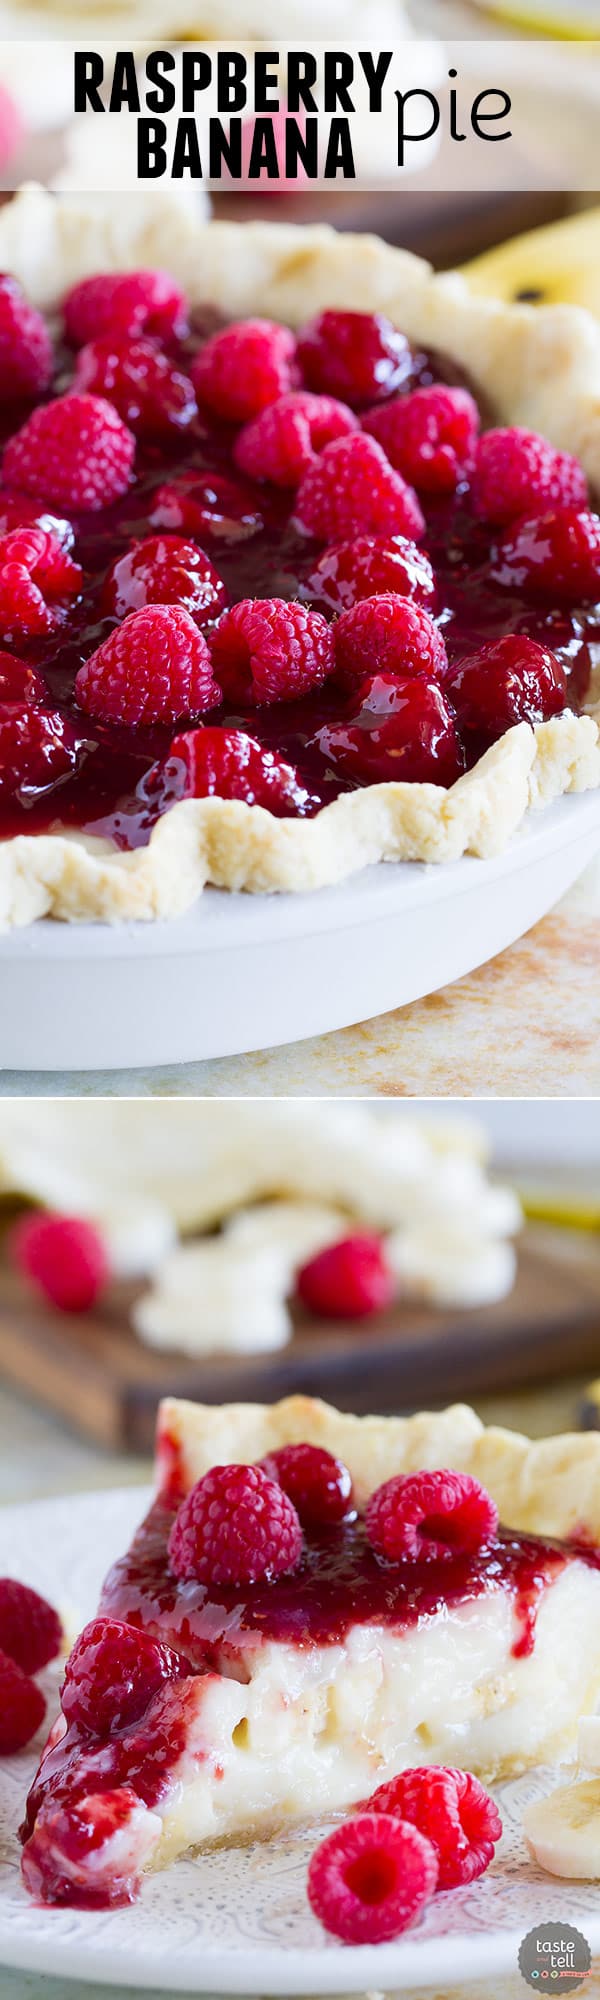 Banana cream pie meets raspberry goodness in this Raspberry Banana Pie recipe that is sweet and creamy and perfect. Who would have ever guessed that raspberry and banana were such a perfect match?